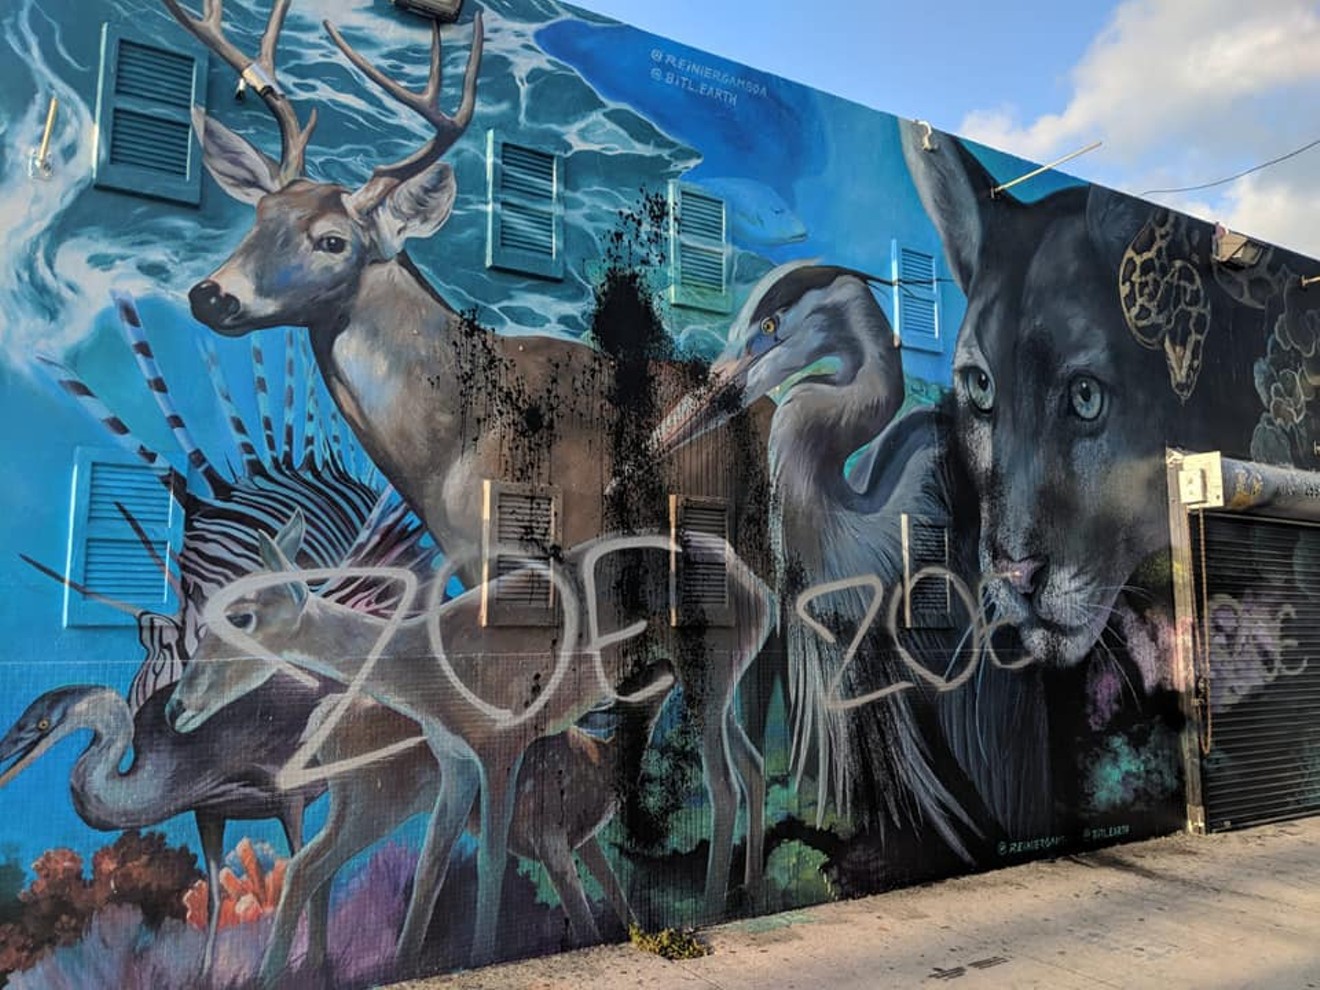 The vandalized mural painted by Miami artist Reinier Gamboa.